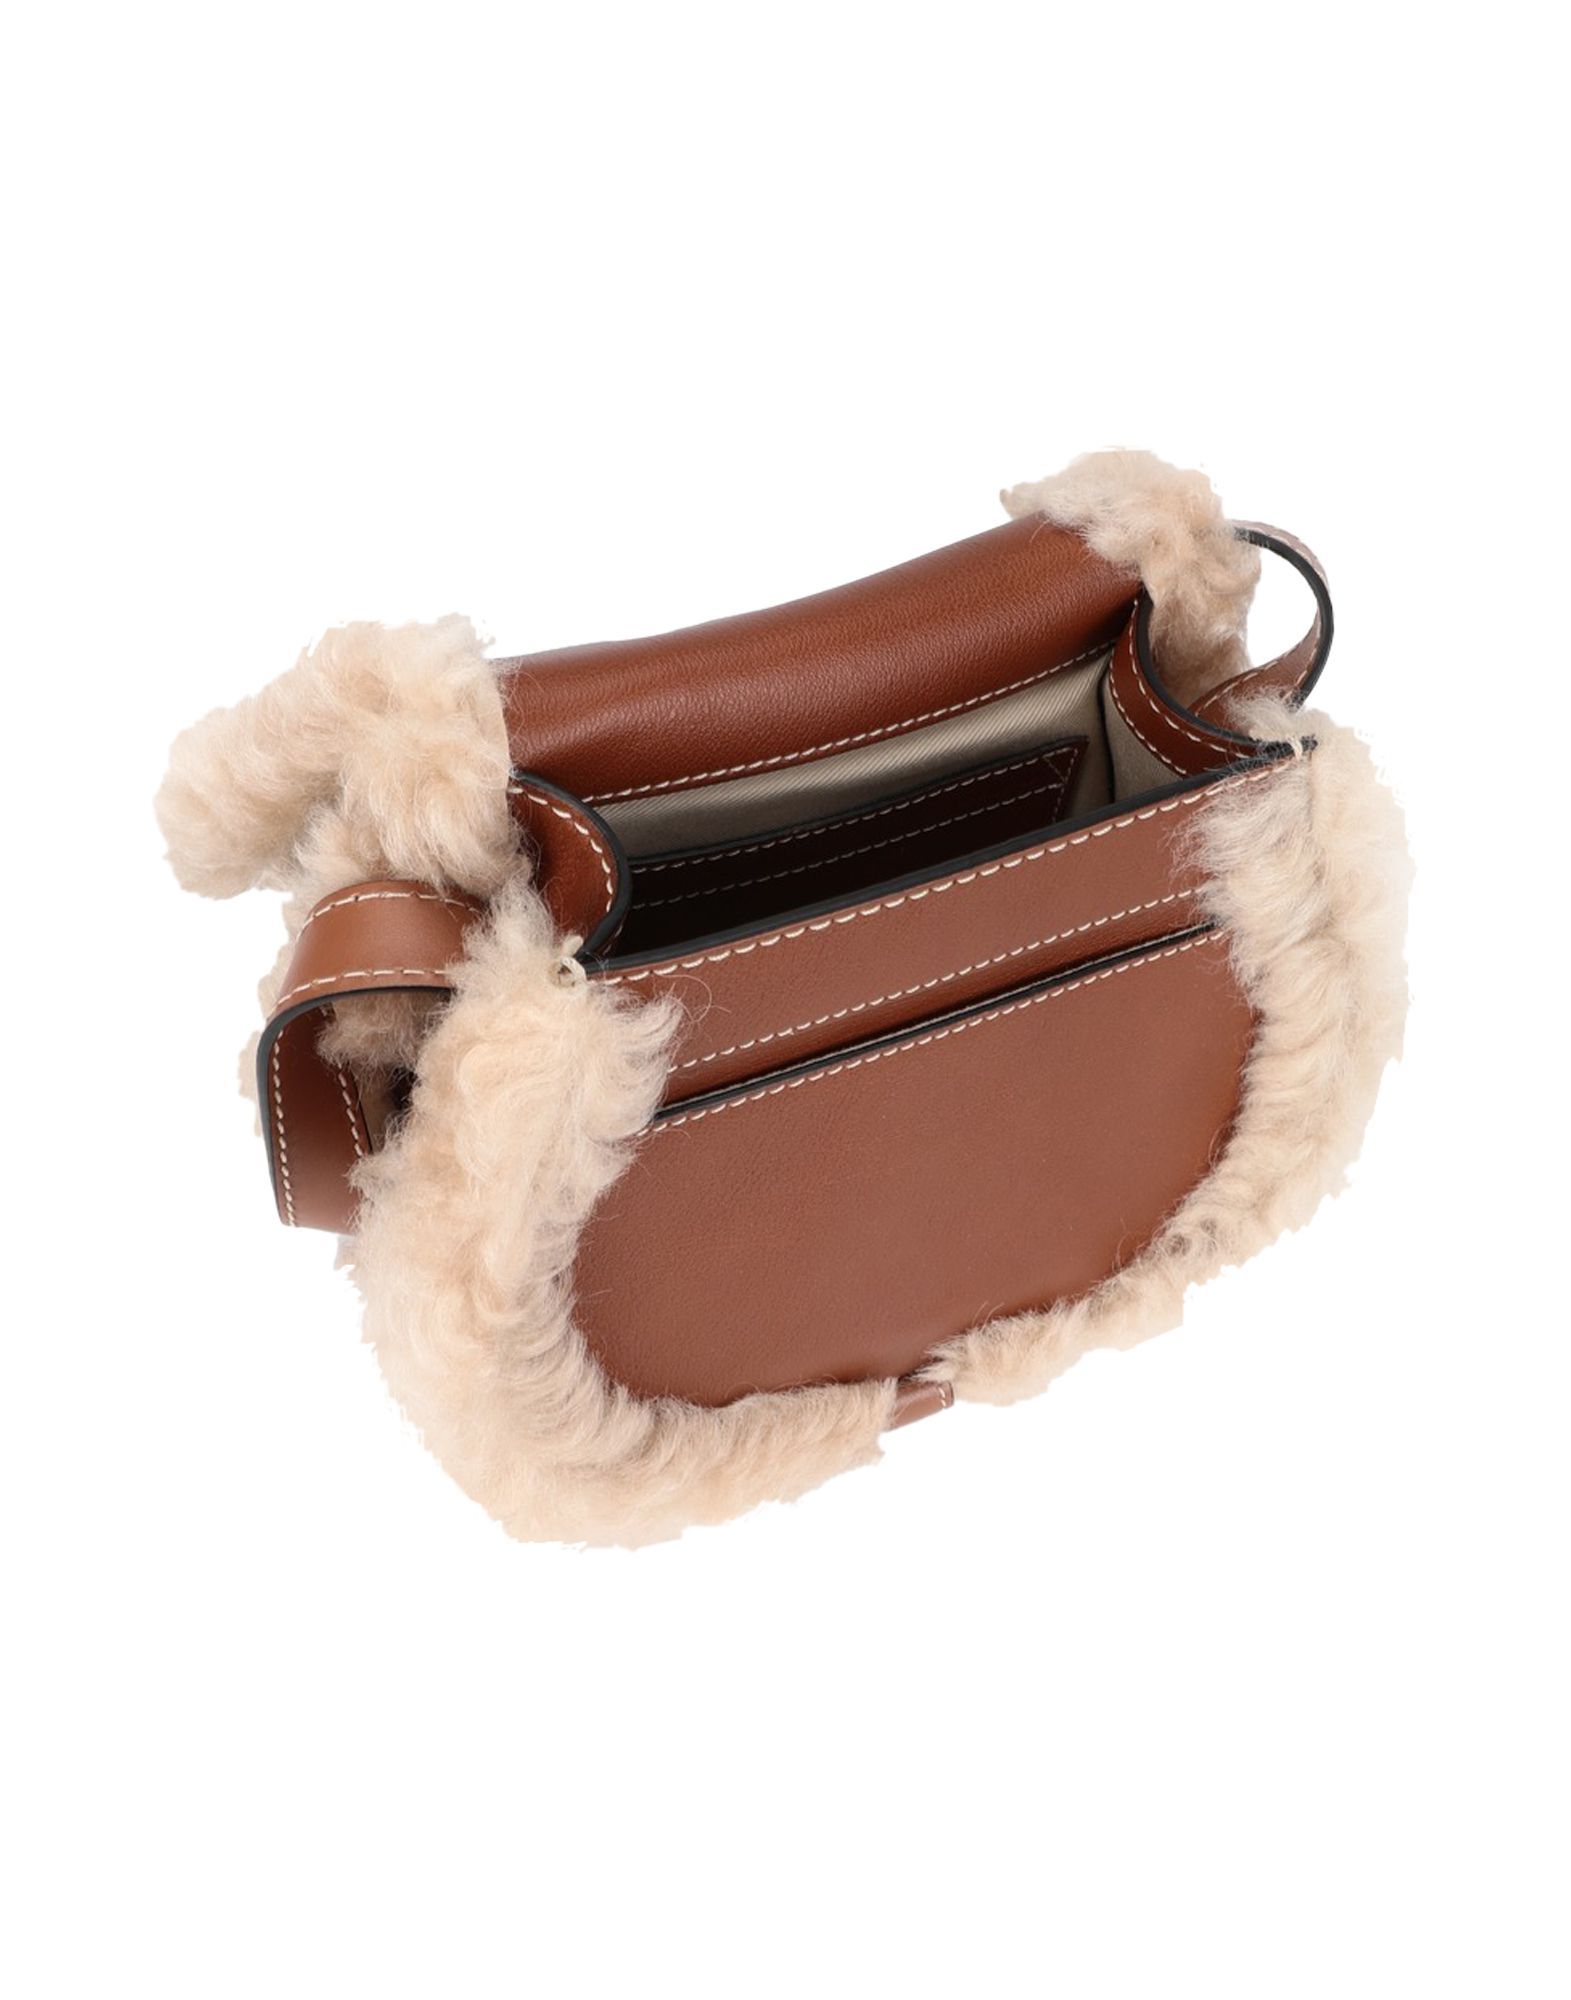 solid colour, mini, stitching , adjustable shoulder straps, leather lining, contains non-textile parts of animal origin